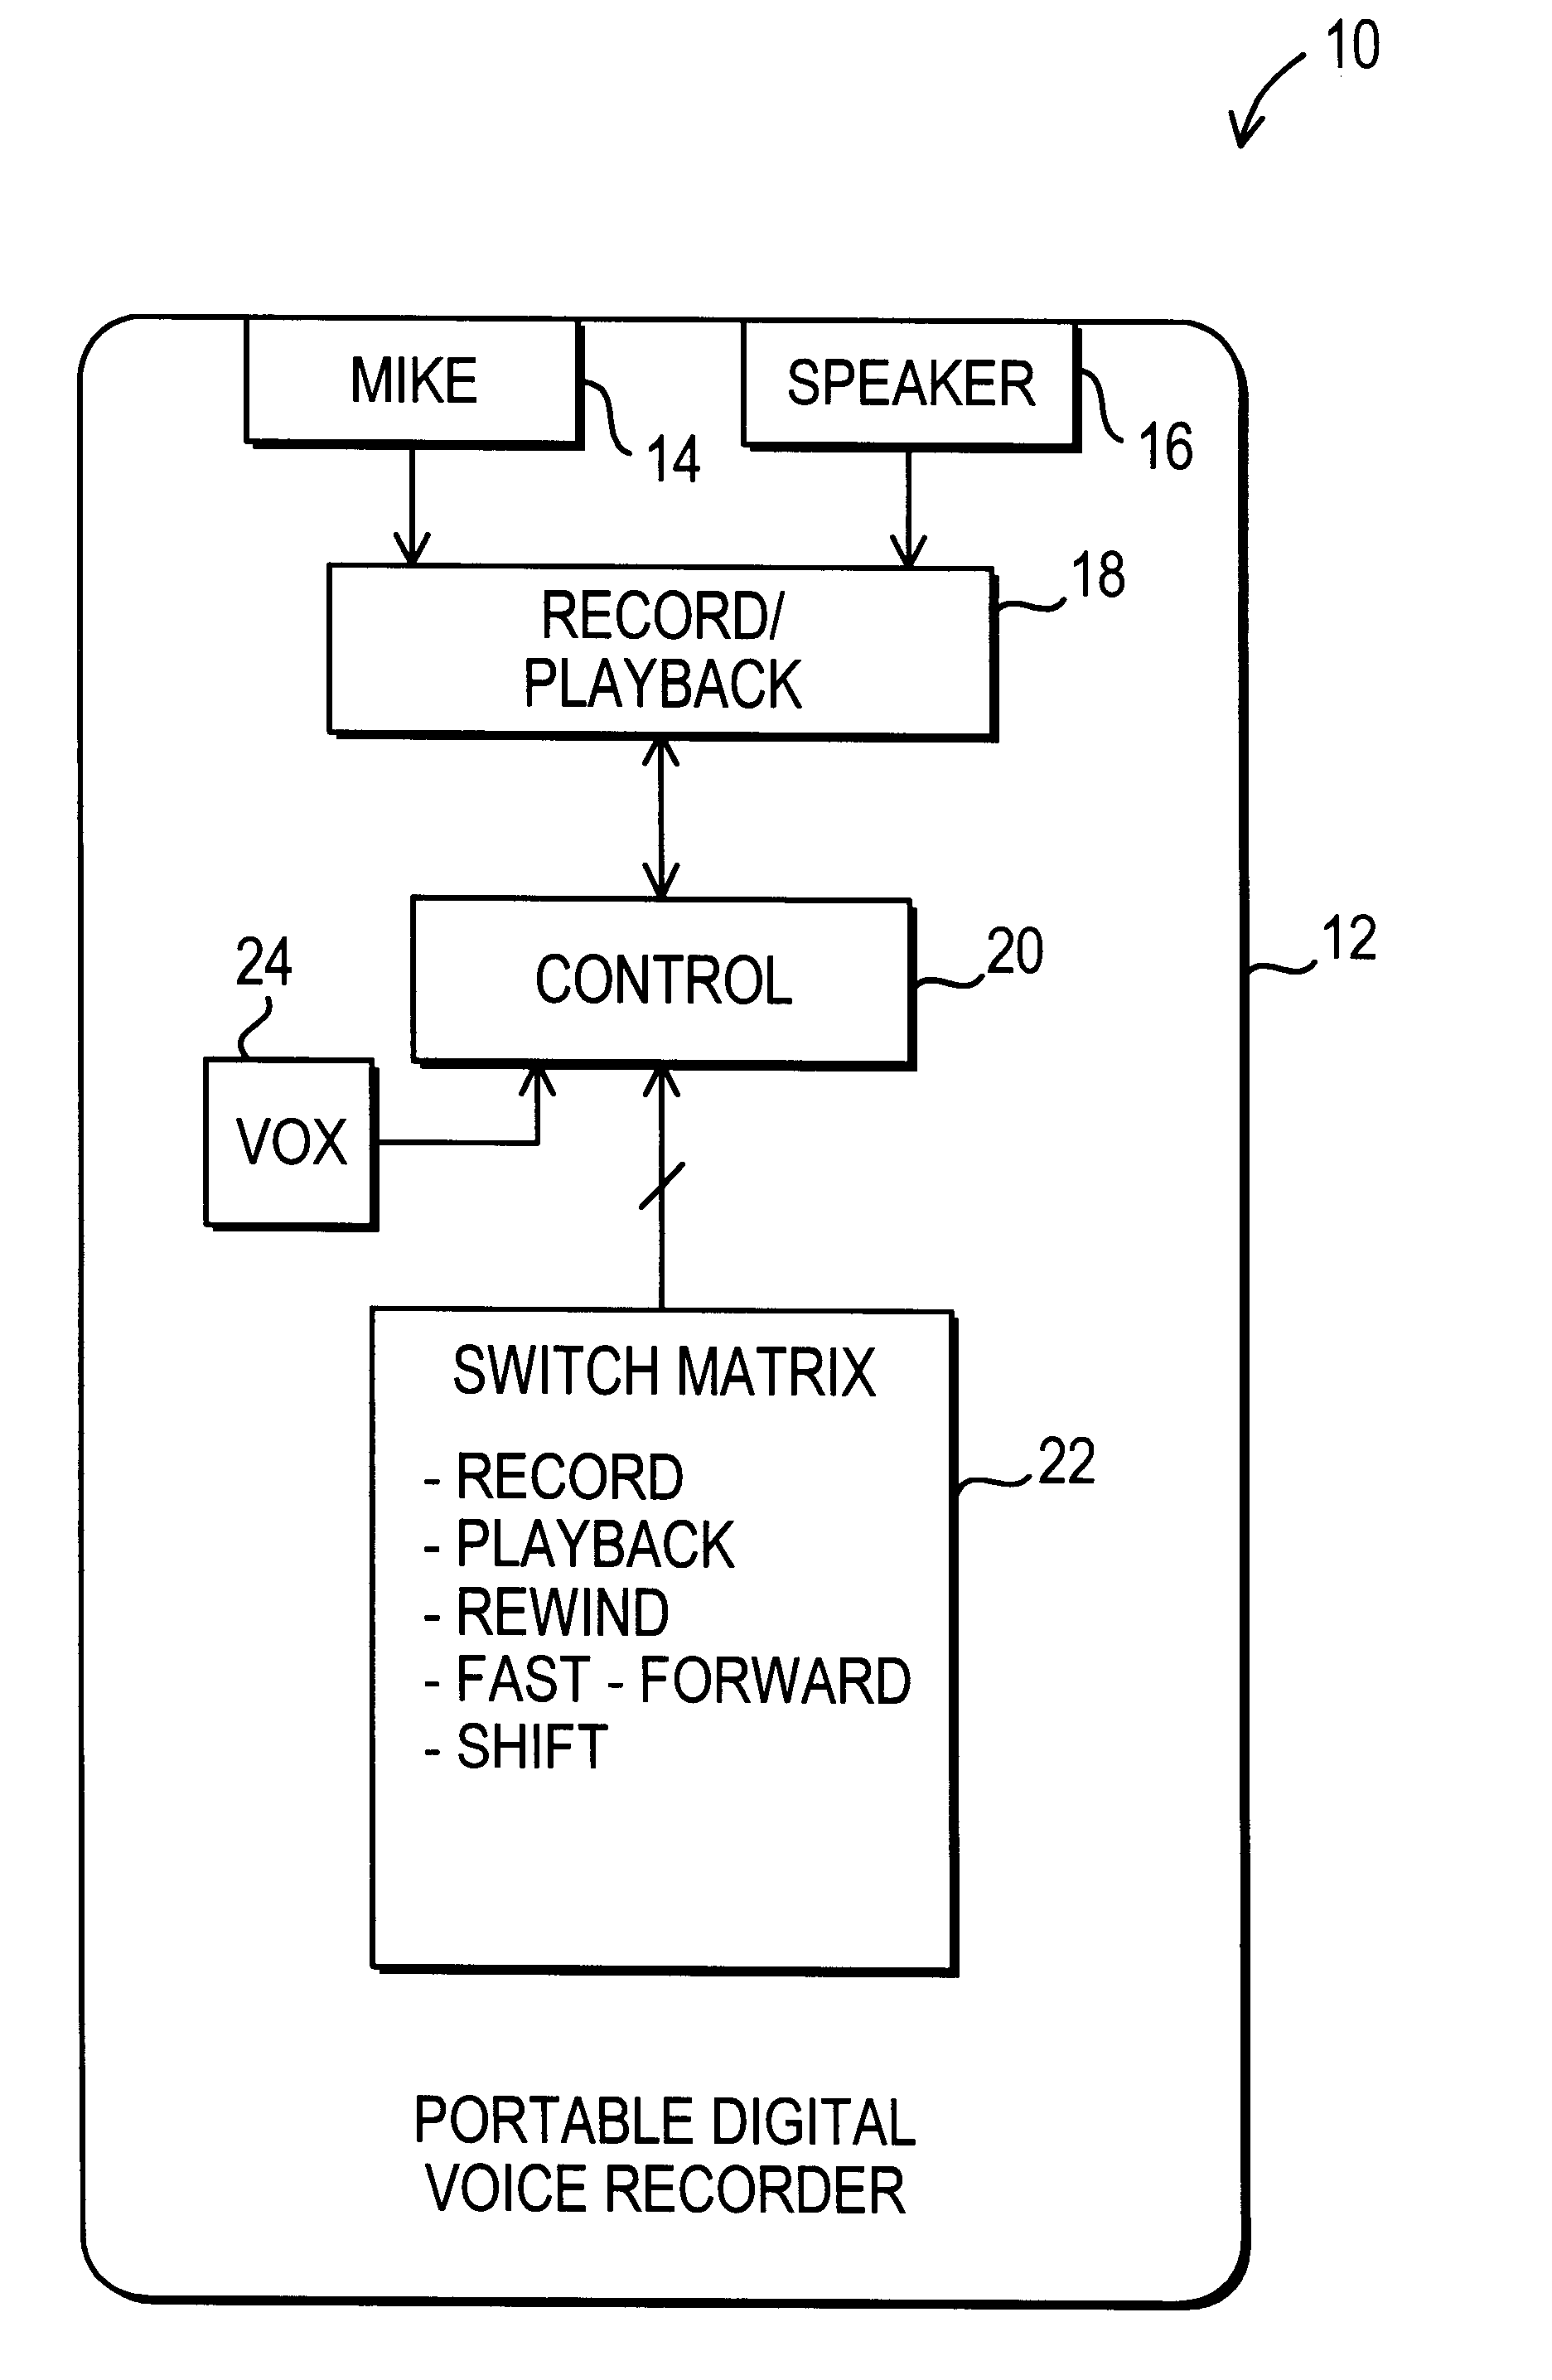 Enhanced user control operations for sound recording system